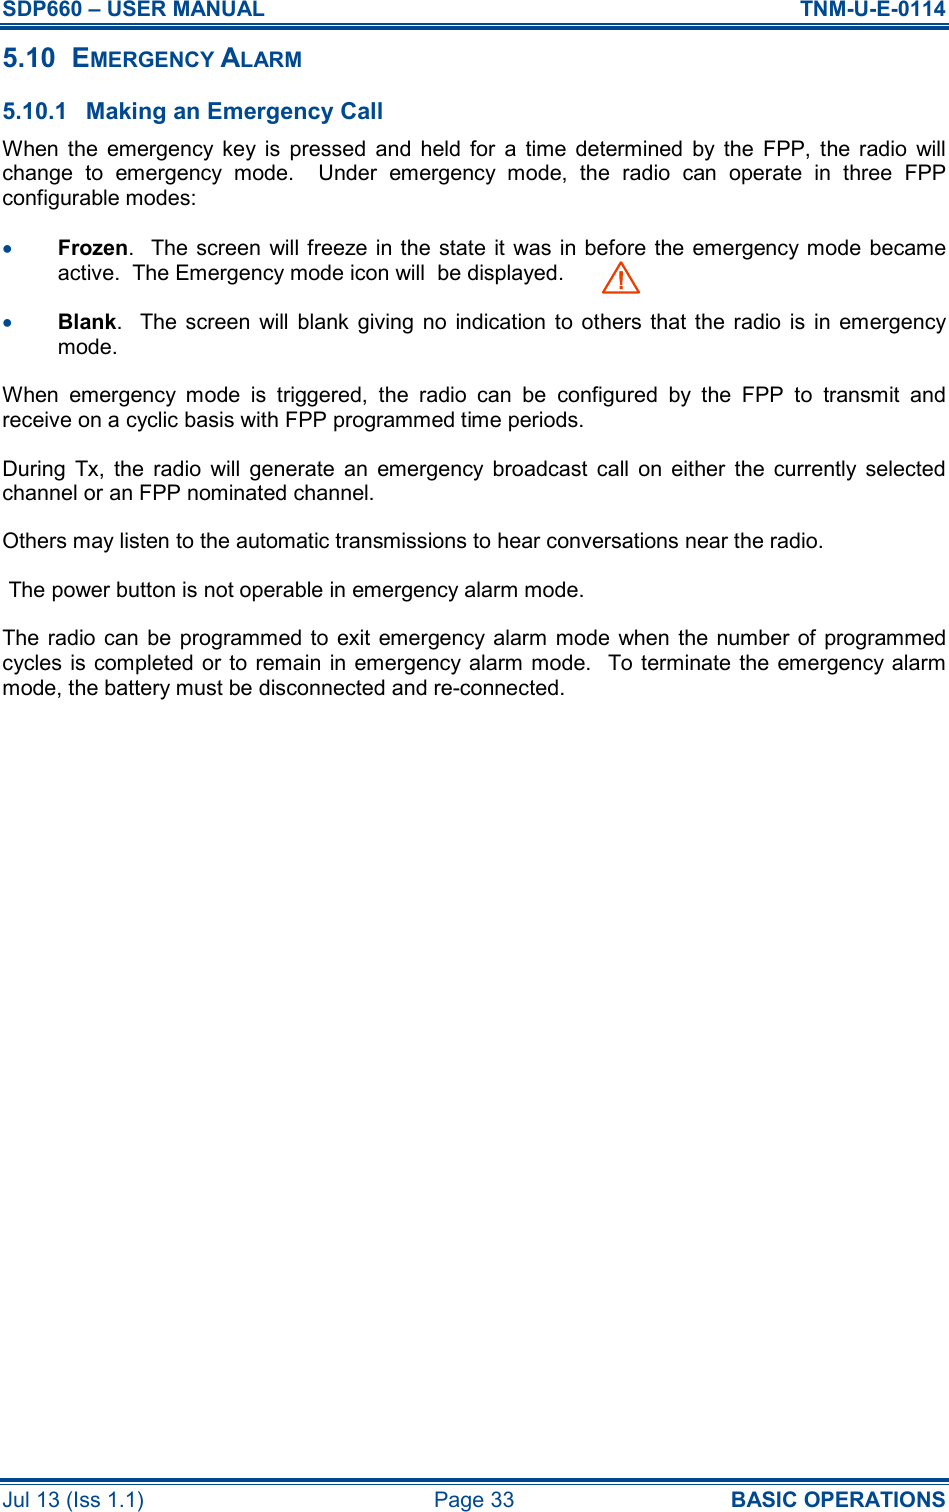 SDP660 – USER MANUAL  TNM-U-E-0114 Jul 13 (Iss 1.1)  Page 33  BASIC OPERATIONS 5.10  EMERGENCY ALARM 5.10.1  Making an Emergency Call When  the  emergency  key  is  pressed  and  held  for  a  time  determined  by  the  FPP,  the  radio  will change  to  emergency  mode.    Under  emergency  mode,  the  radio  can  operate  in  three  FPP configurable modes: •  Frozen.   The screen will  freeze in the state it was  in before  the emergency mode  became active.  The Emergency mode icon will  be displayed.     •  Blank.    The screen  will  blank  giving  no  indication to  others  that  the  radio is  in  emergency mode. When  emergency  mode  is  triggered,  the  radio  can  be  configured  by  the  FPP  to  transmit  and receive on a cyclic basis with FPP programmed time periods. During  Tx,  the  radio  will  generate  an  emergency  broadcast  call  on  either  the  currently  selected channel or an FPP nominated channel. Others may listen to the automatic transmissions to hear conversations near the radio.  The power button is not operable in emergency alarm mode.  The radio can  be  programmed to  exit emergency alarm mode  when the number  of  programmed cycles is completed or to  remain in emergency alarm mode.   To terminate the  emergency alarm mode, the battery must be disconnected and re-connected.     